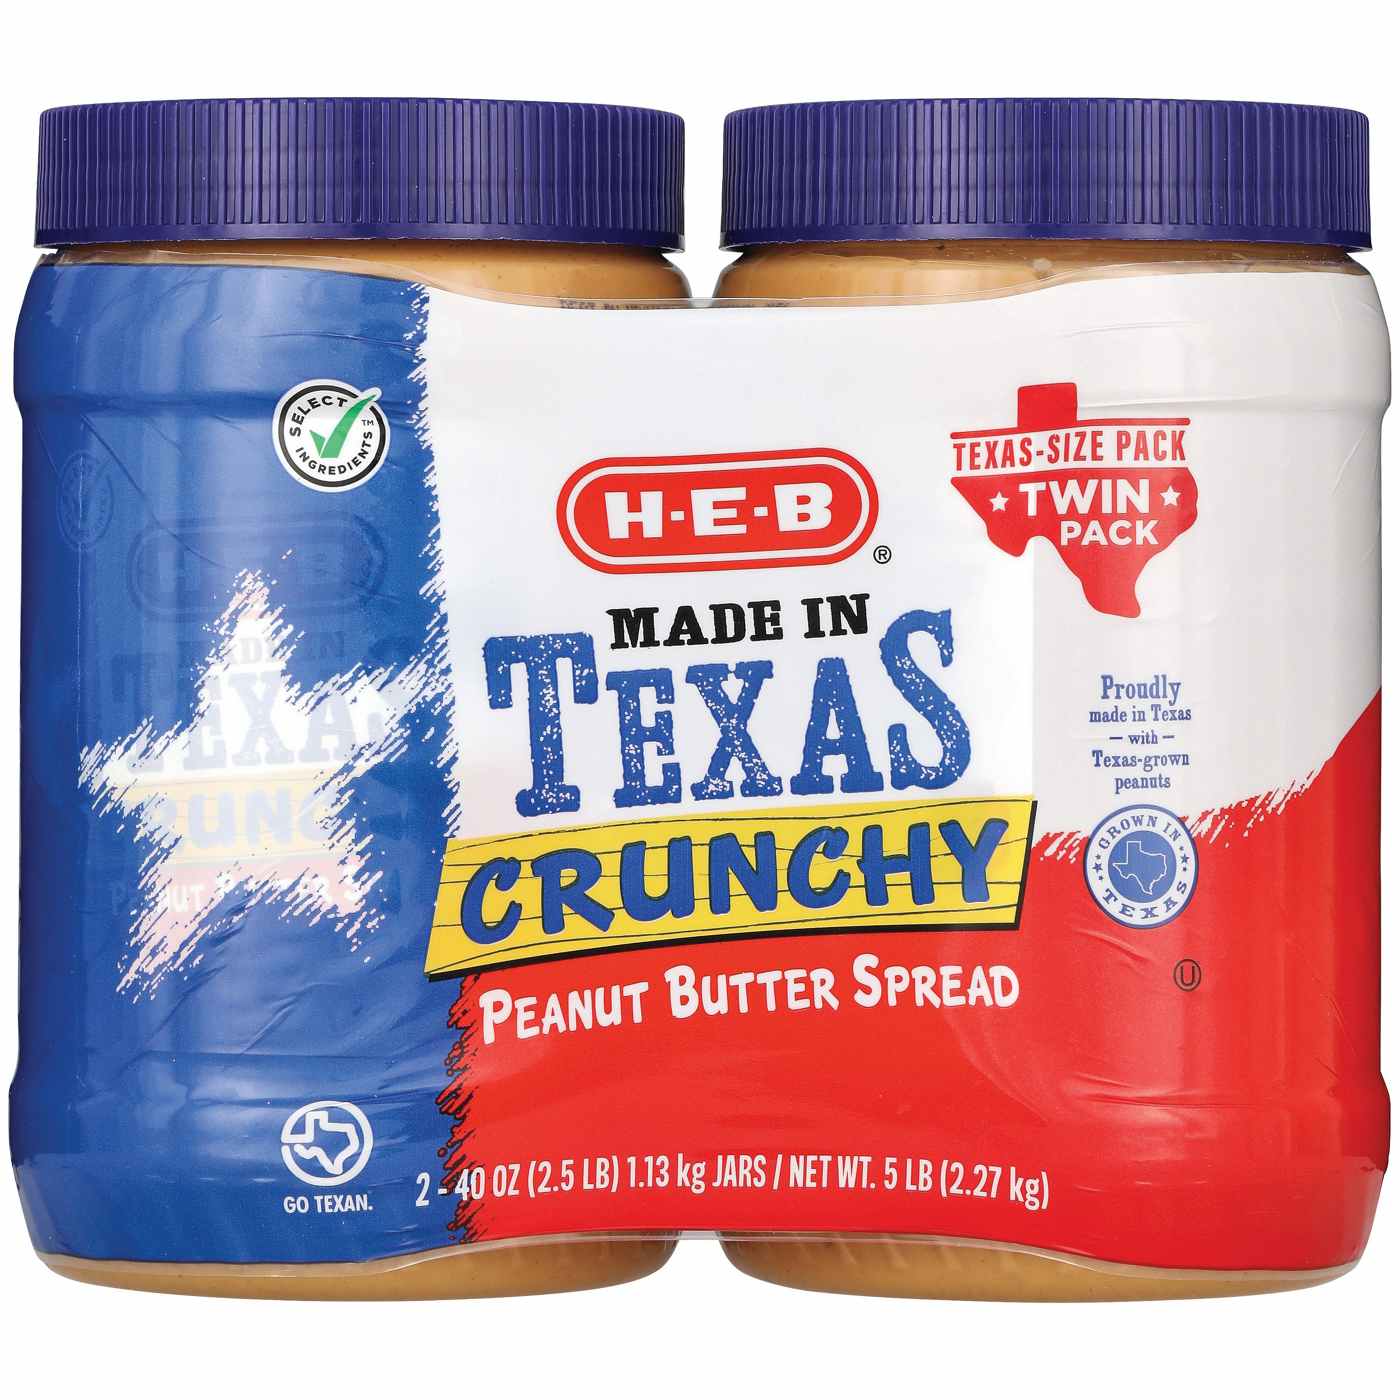 H-E-B Made in Texas Crunchy Peanut Butter – Texas-Size Pack Twin Pack; image 1 of 2